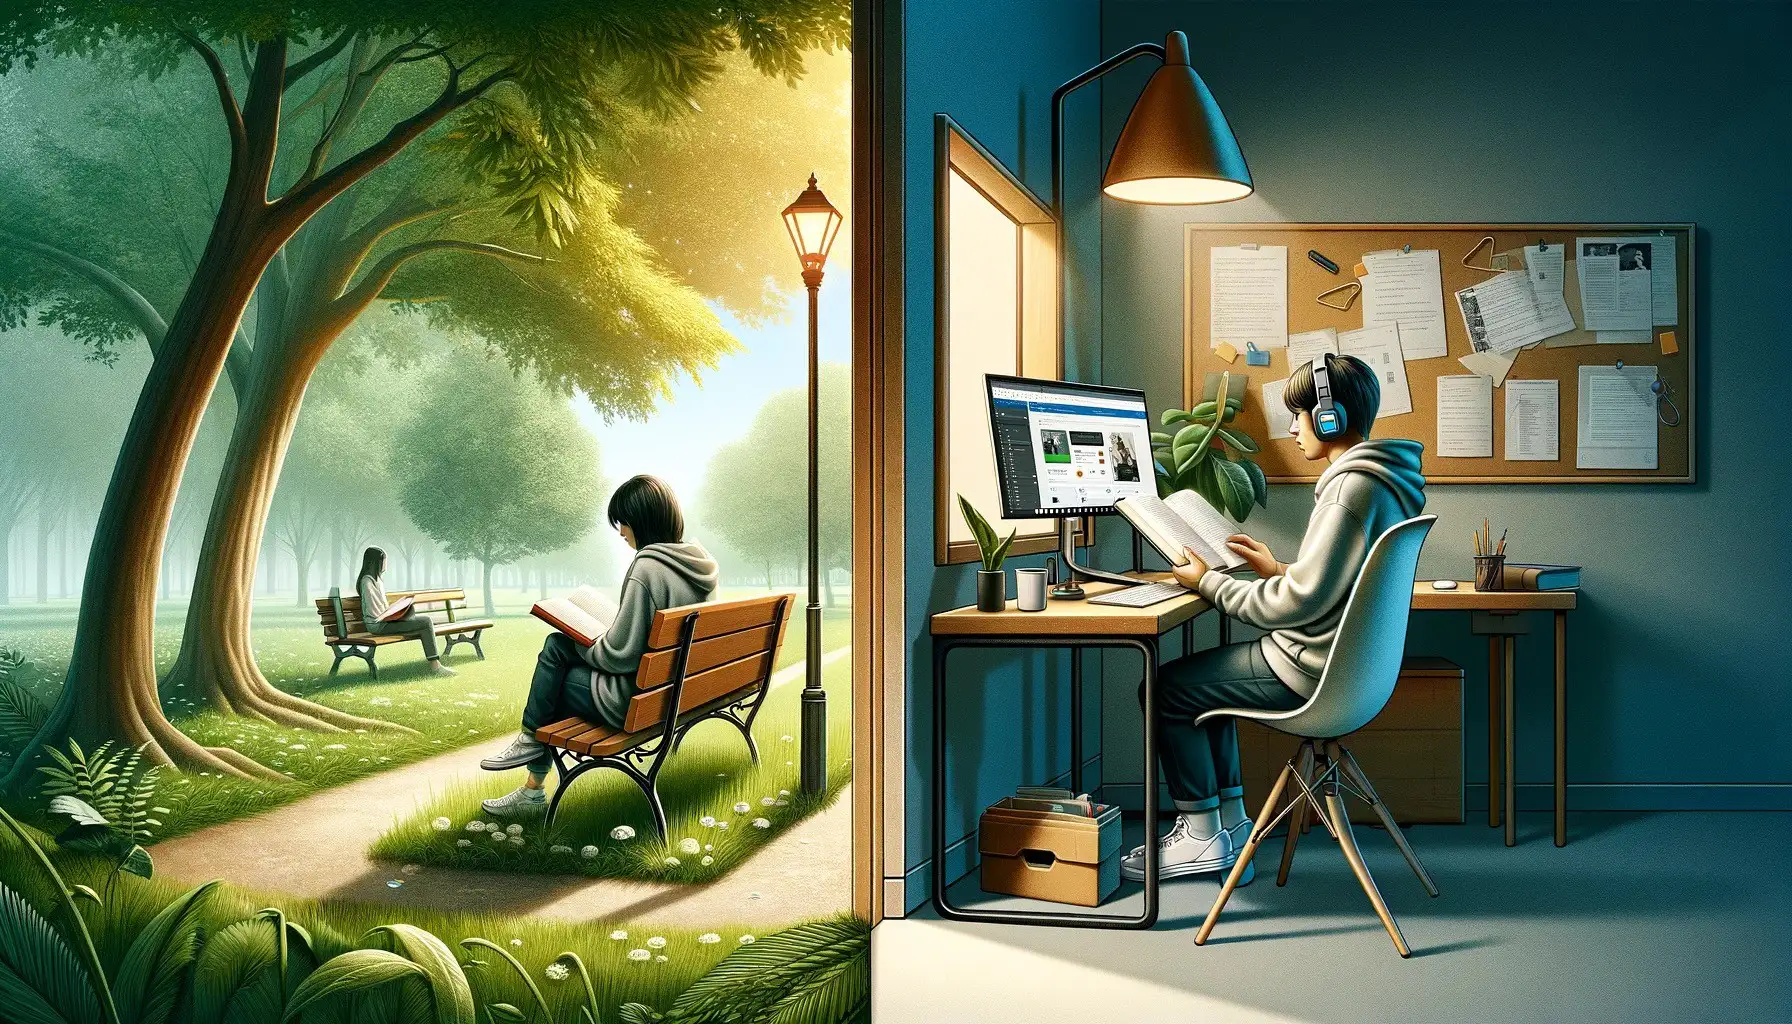 a-realistic-illustration-that-seamlessly-portrays-two-individuals-in-separate-learning-environments